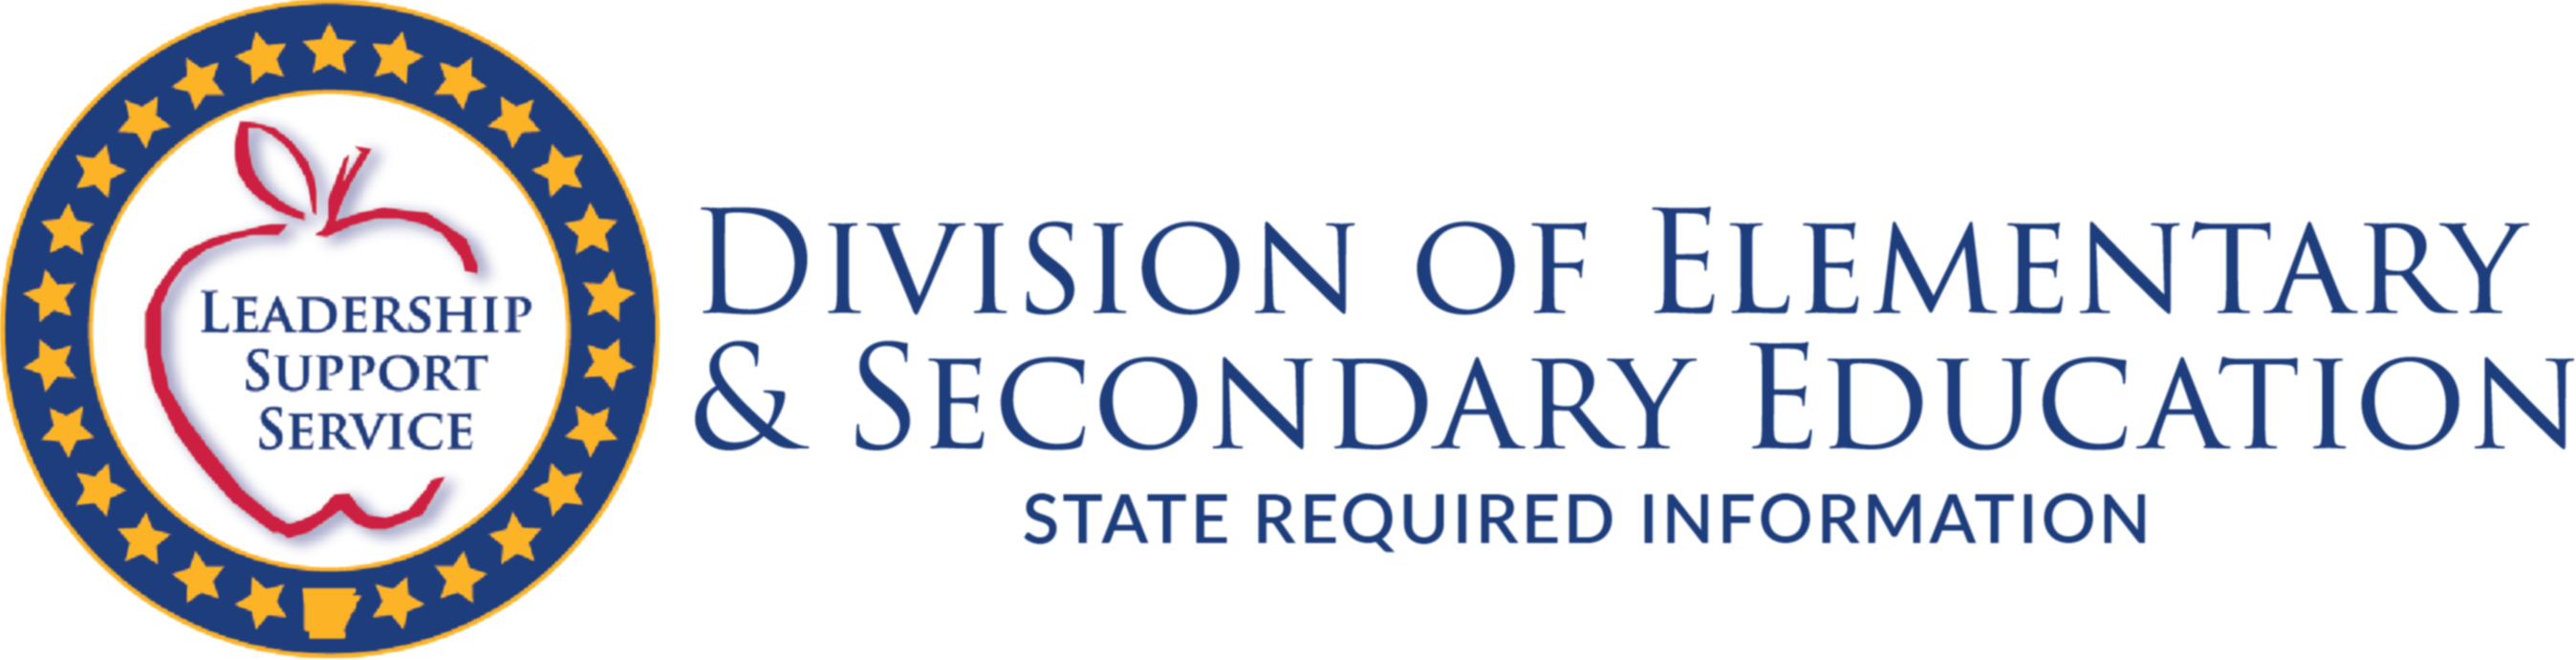 Division of Secondary Elementary and Secondary Education. State Required Information